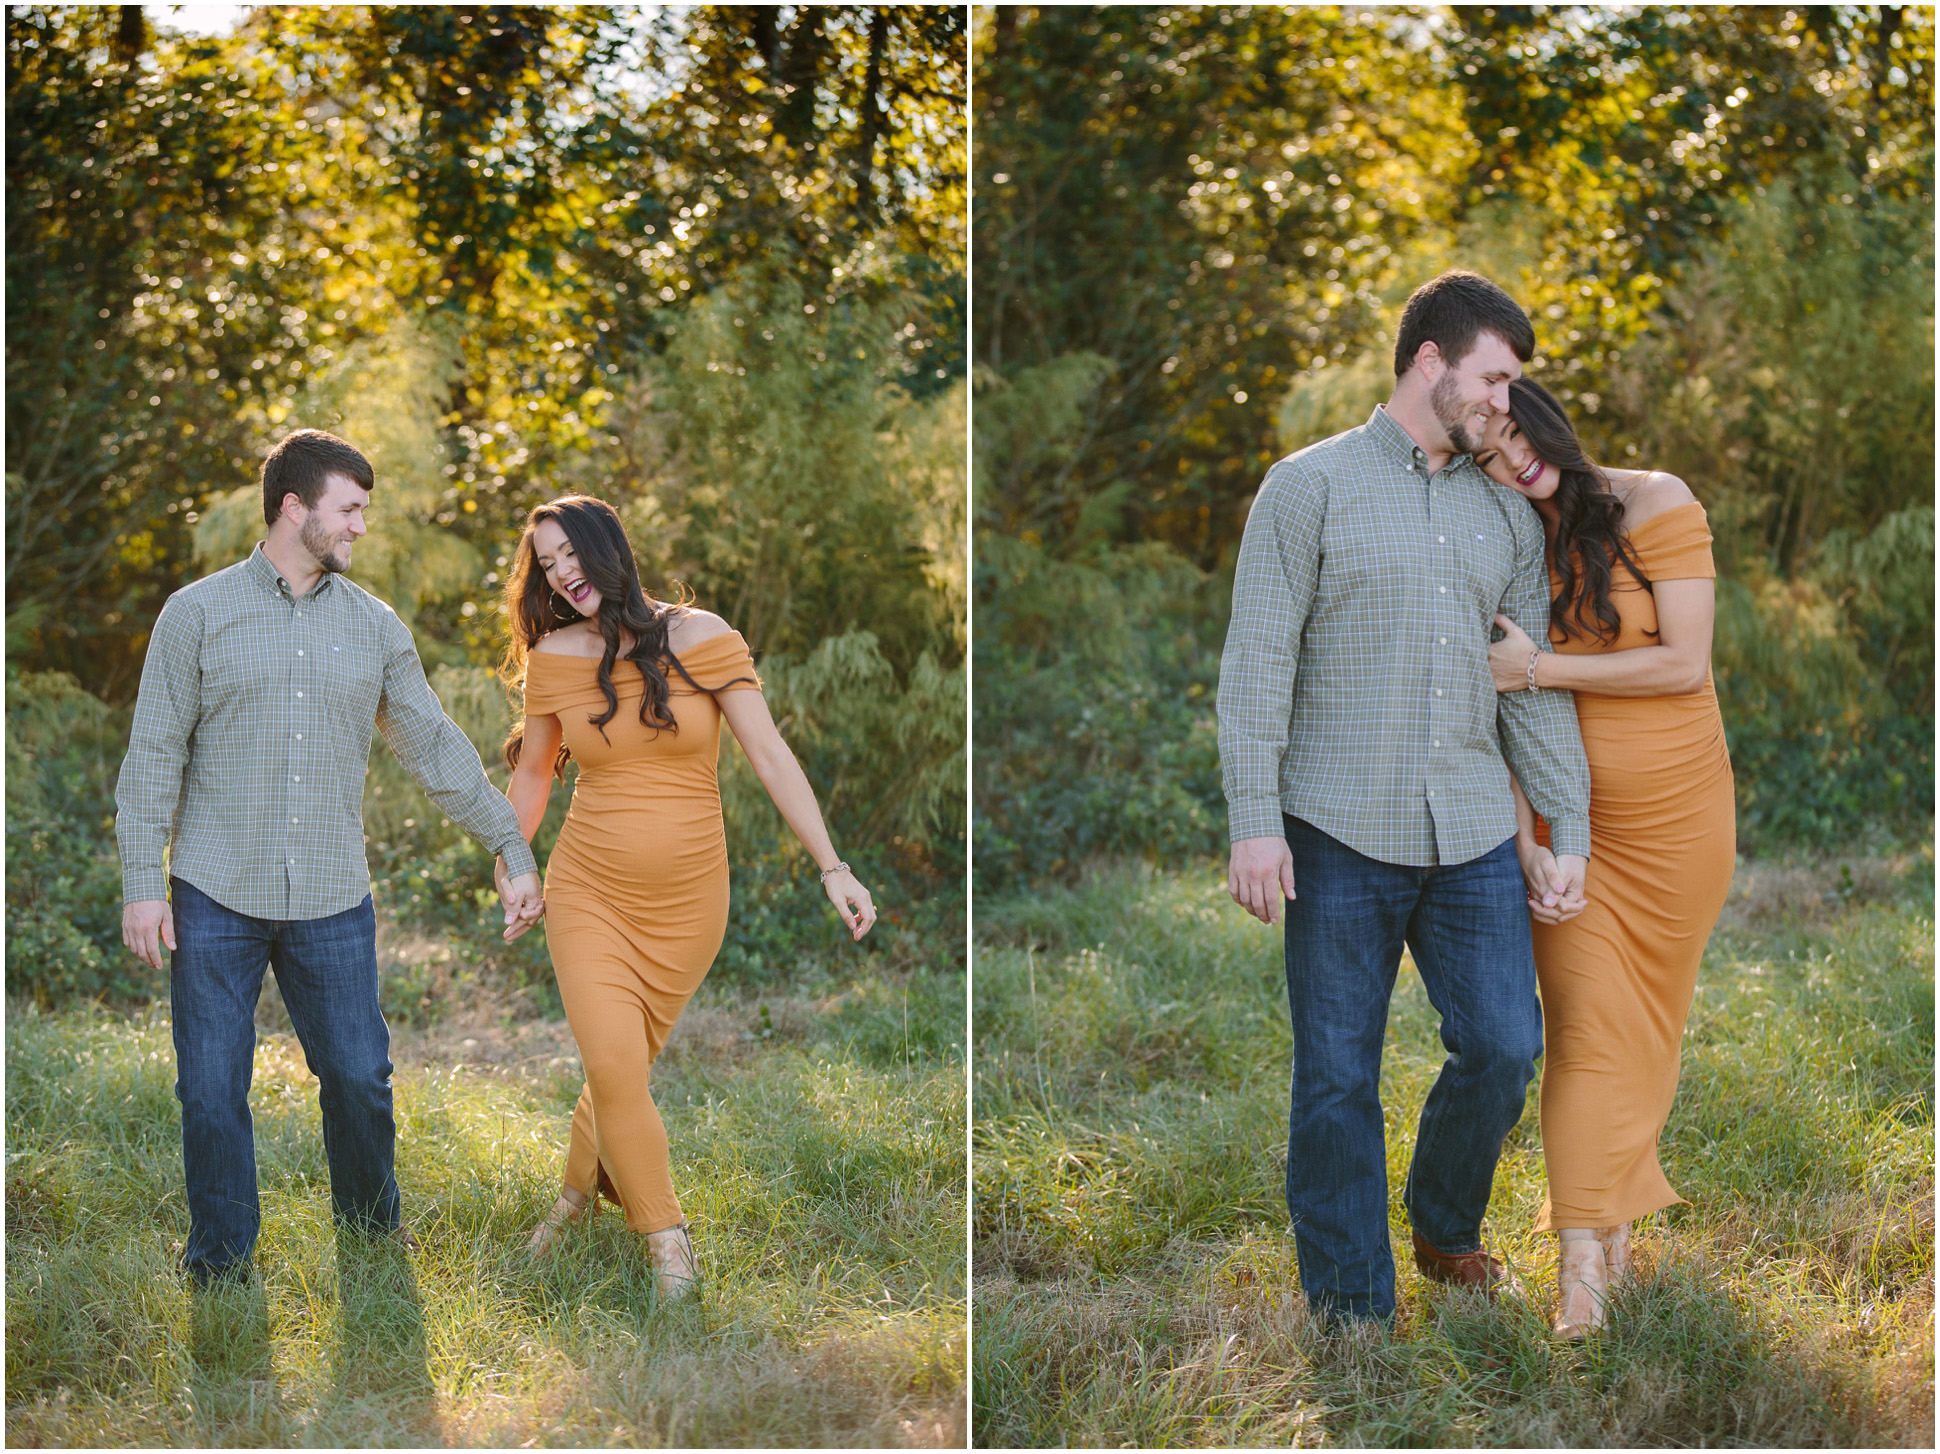 Natural Field Maternity Session | Two Chics Photography | www.twochicsphotography.com